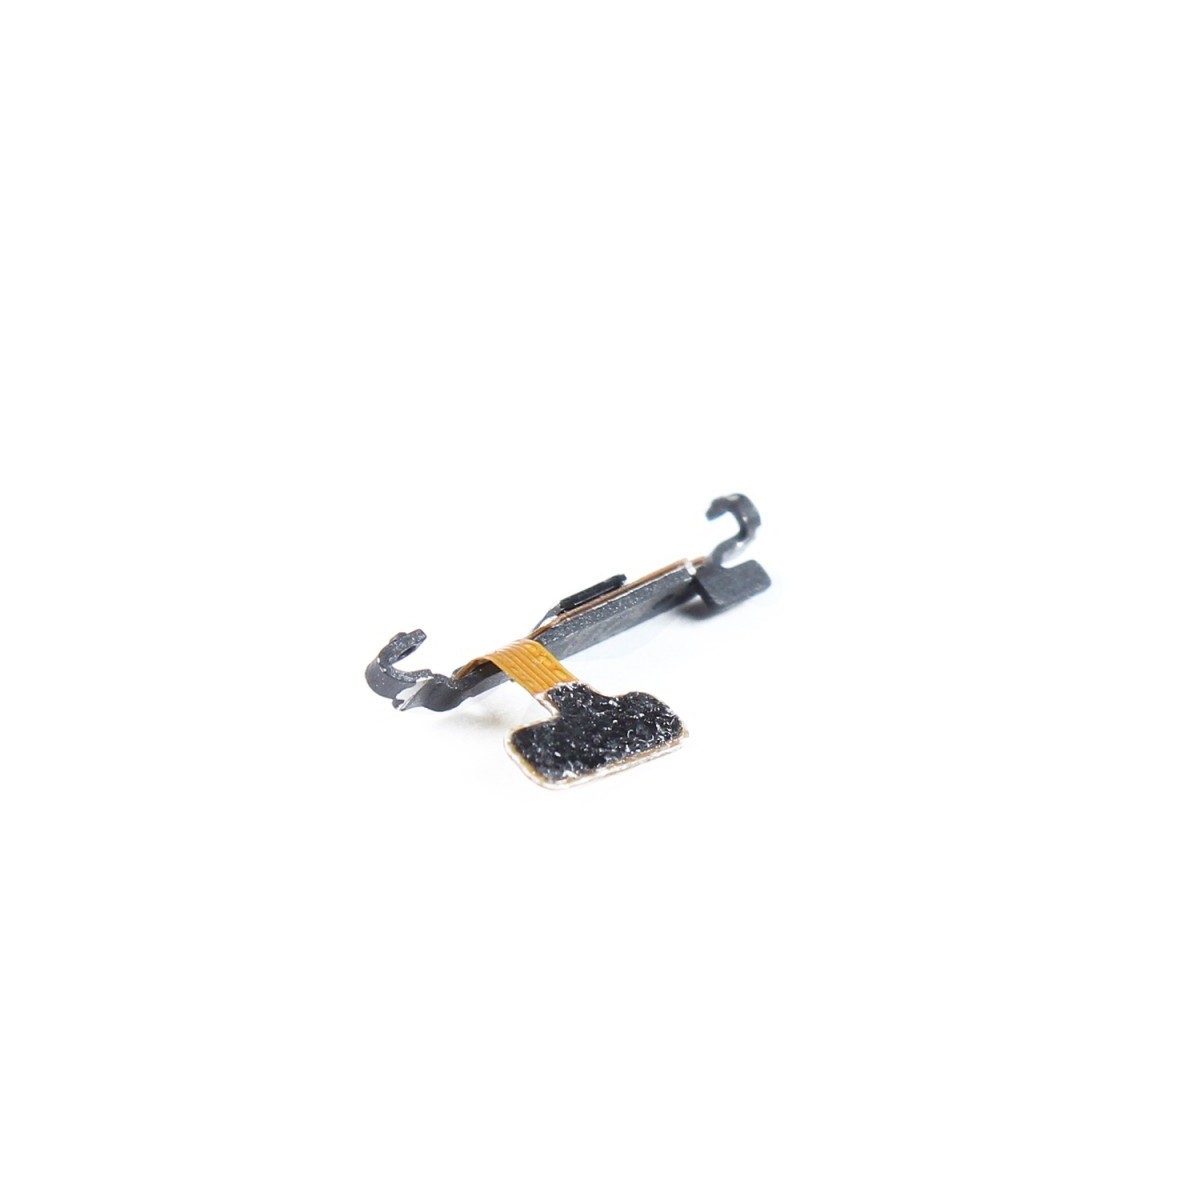 NAPPE BOUTON POWER ON/OFF SAMSUNG GALAXY S6 SM-G920F